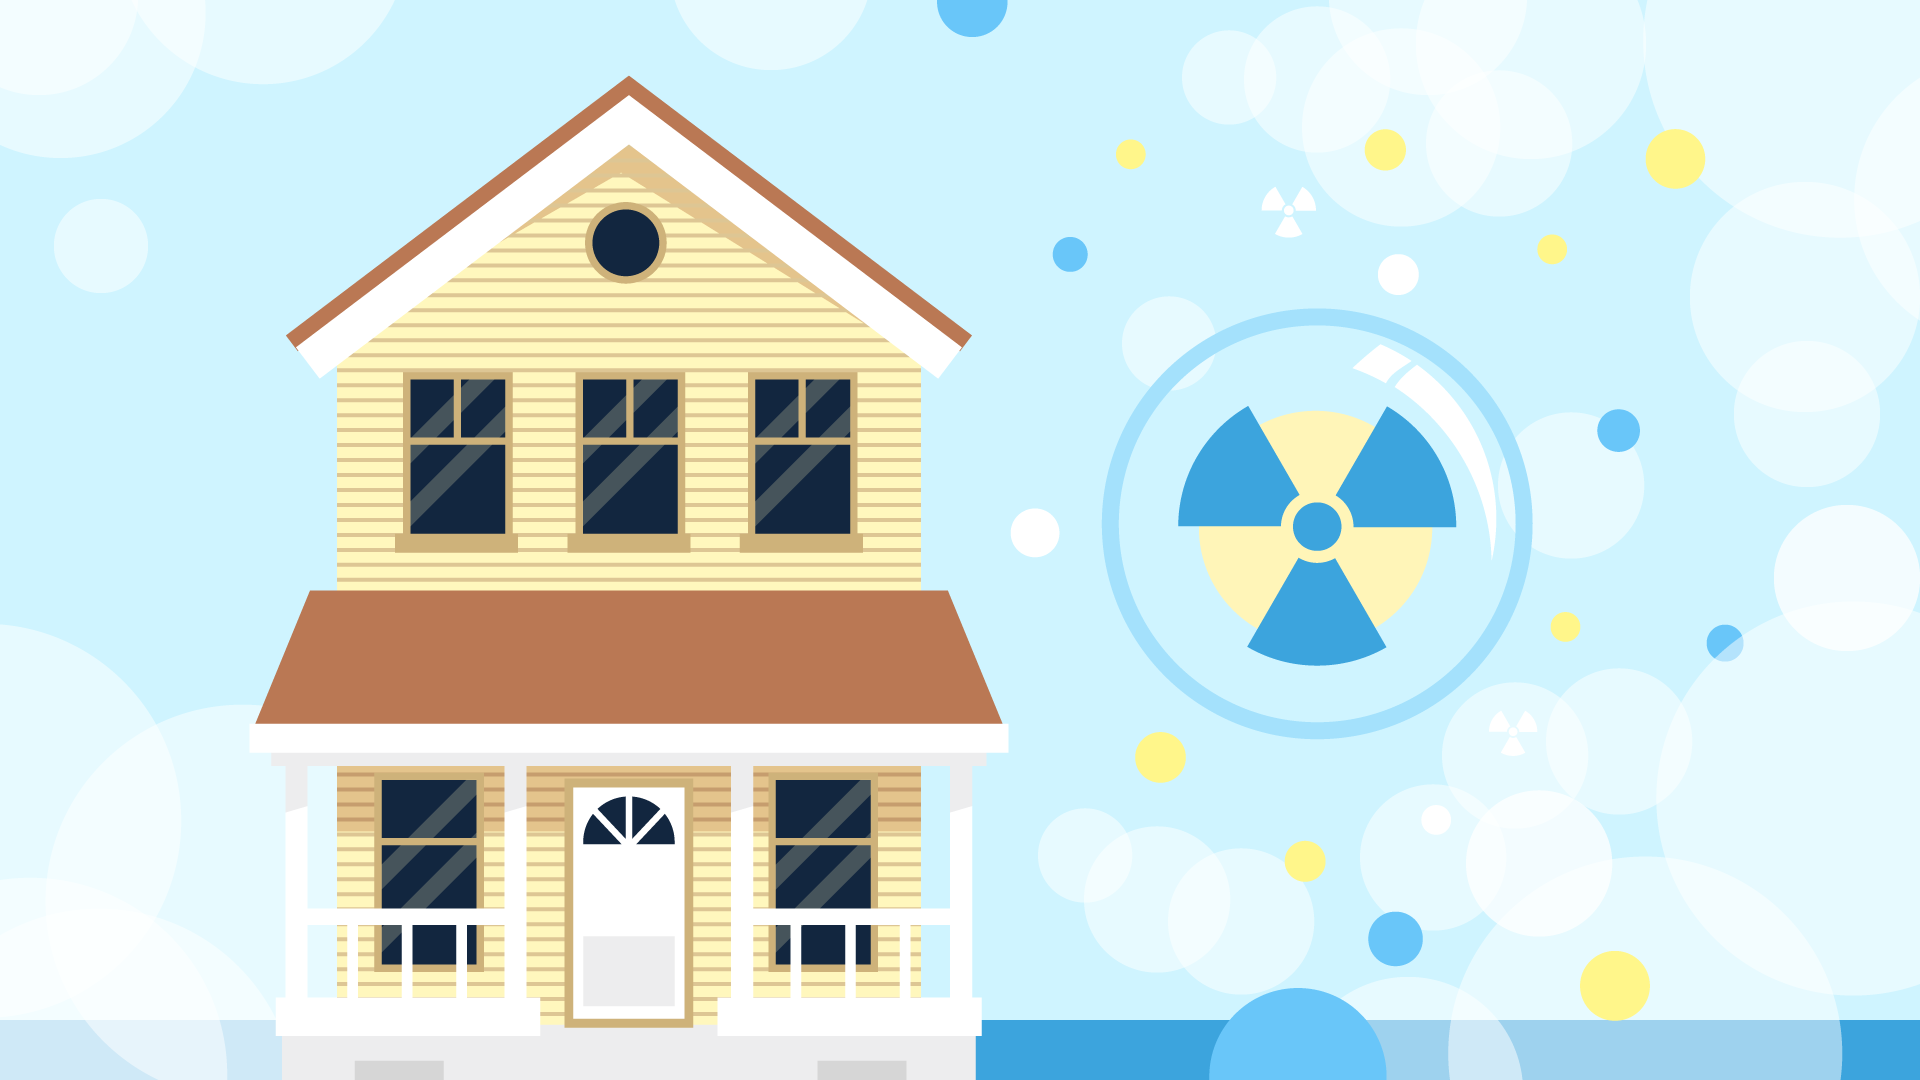 National Radon Action Month: 3 Ways to Test the Air Quality